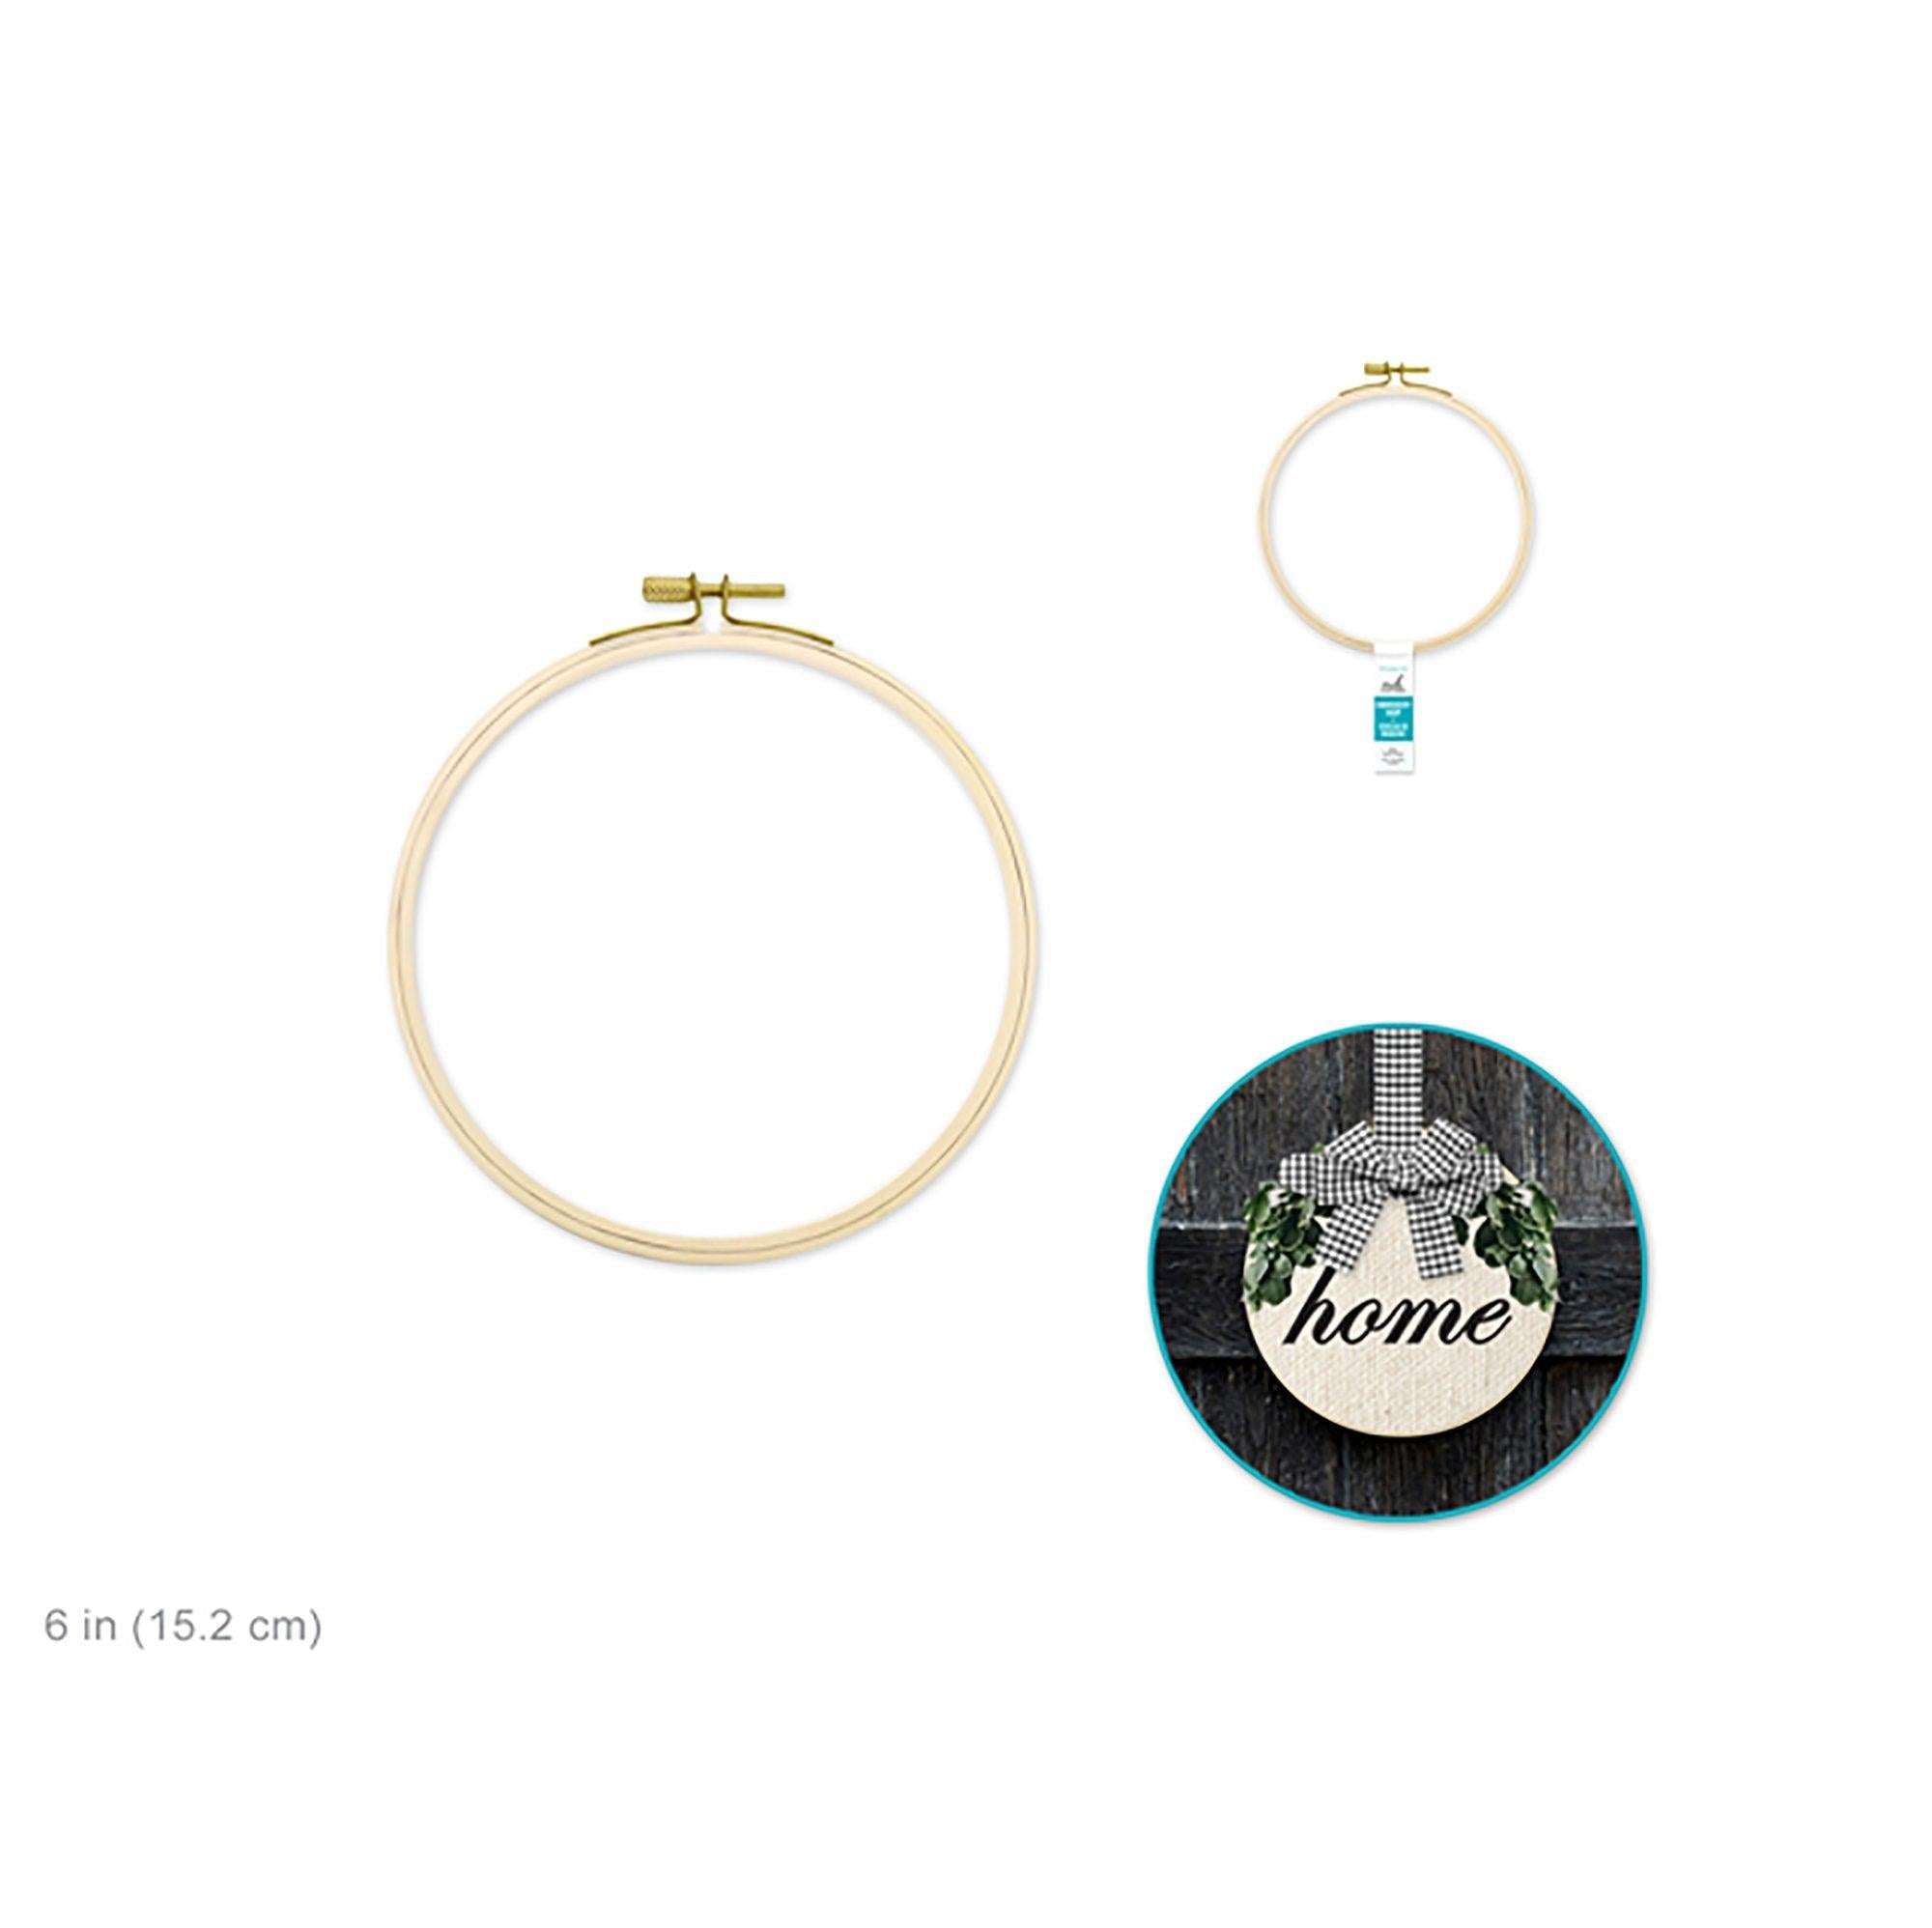 Needlecrafters: 6 inch  Embroidery Hoop w/Brass Clamps - Dollar Max Depot